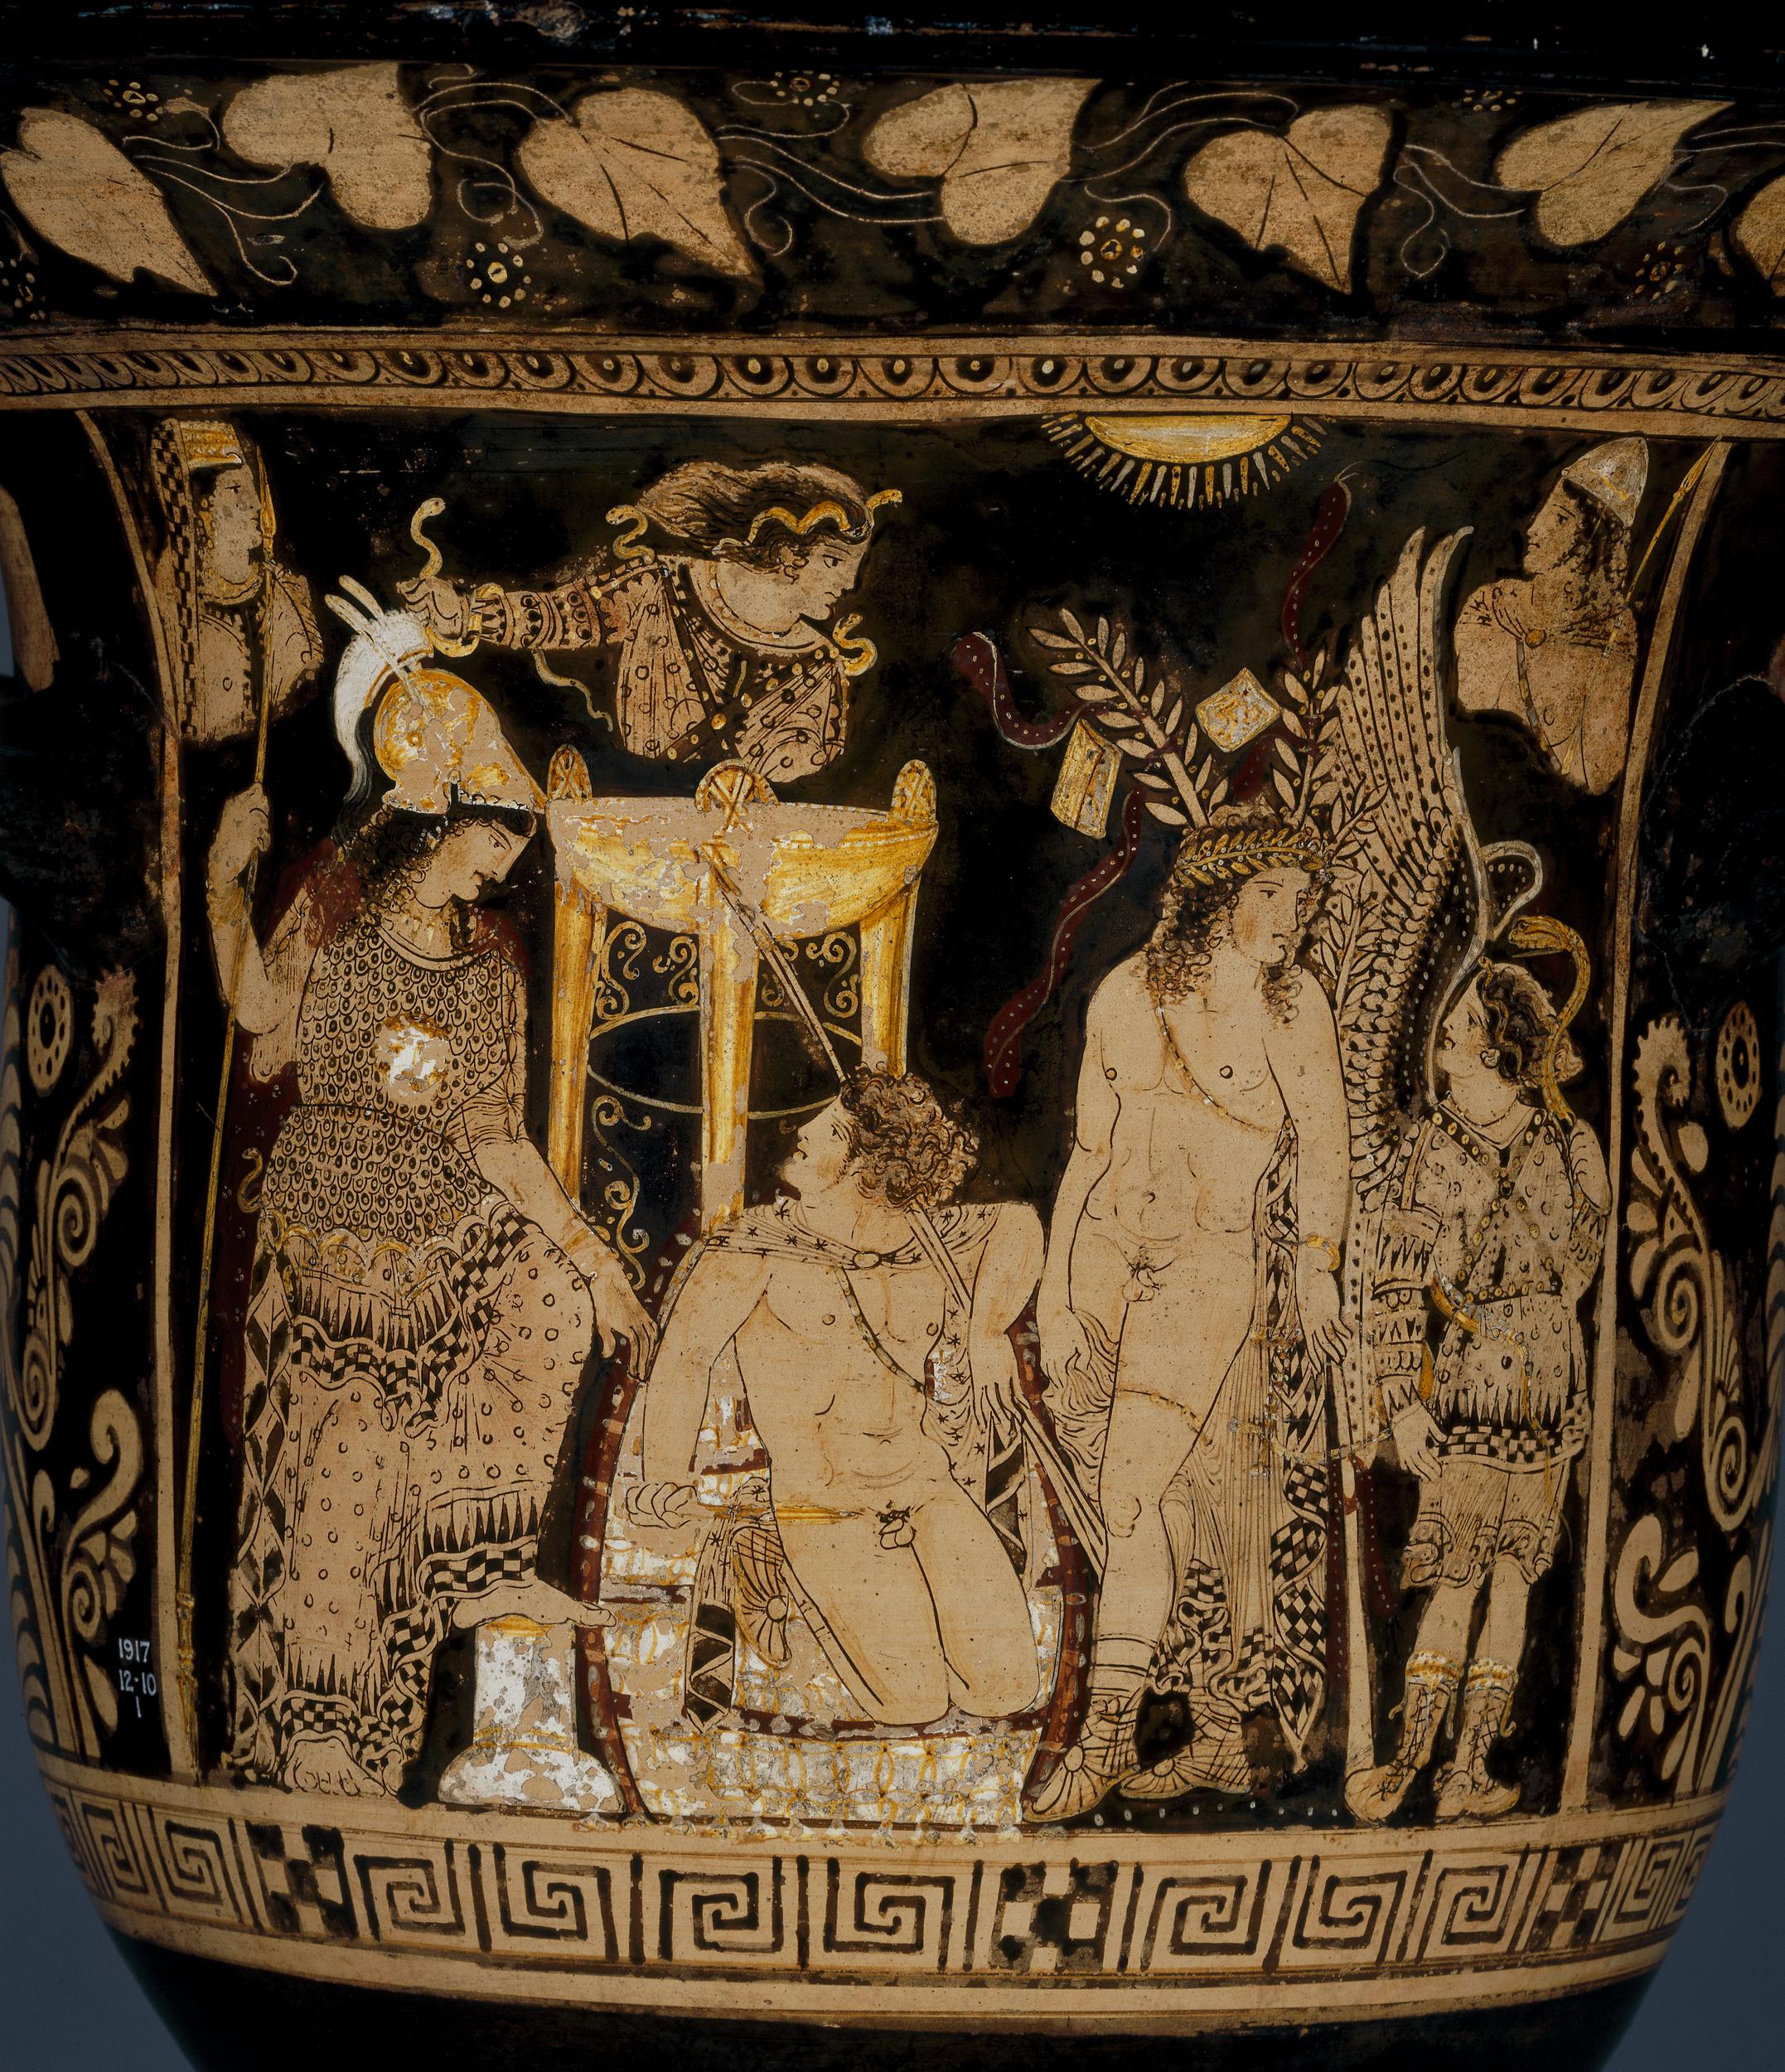 Orestes, nude with chlamys cape and a spear, kneels in from of the delphic tripod and looks up at Athena. Athena, in helm and aegis, stands on his left. Apollo, nude wearing laurels, stands on his right. Two female figures, one with wings and one covered in snakes, are at the edges of the scene.